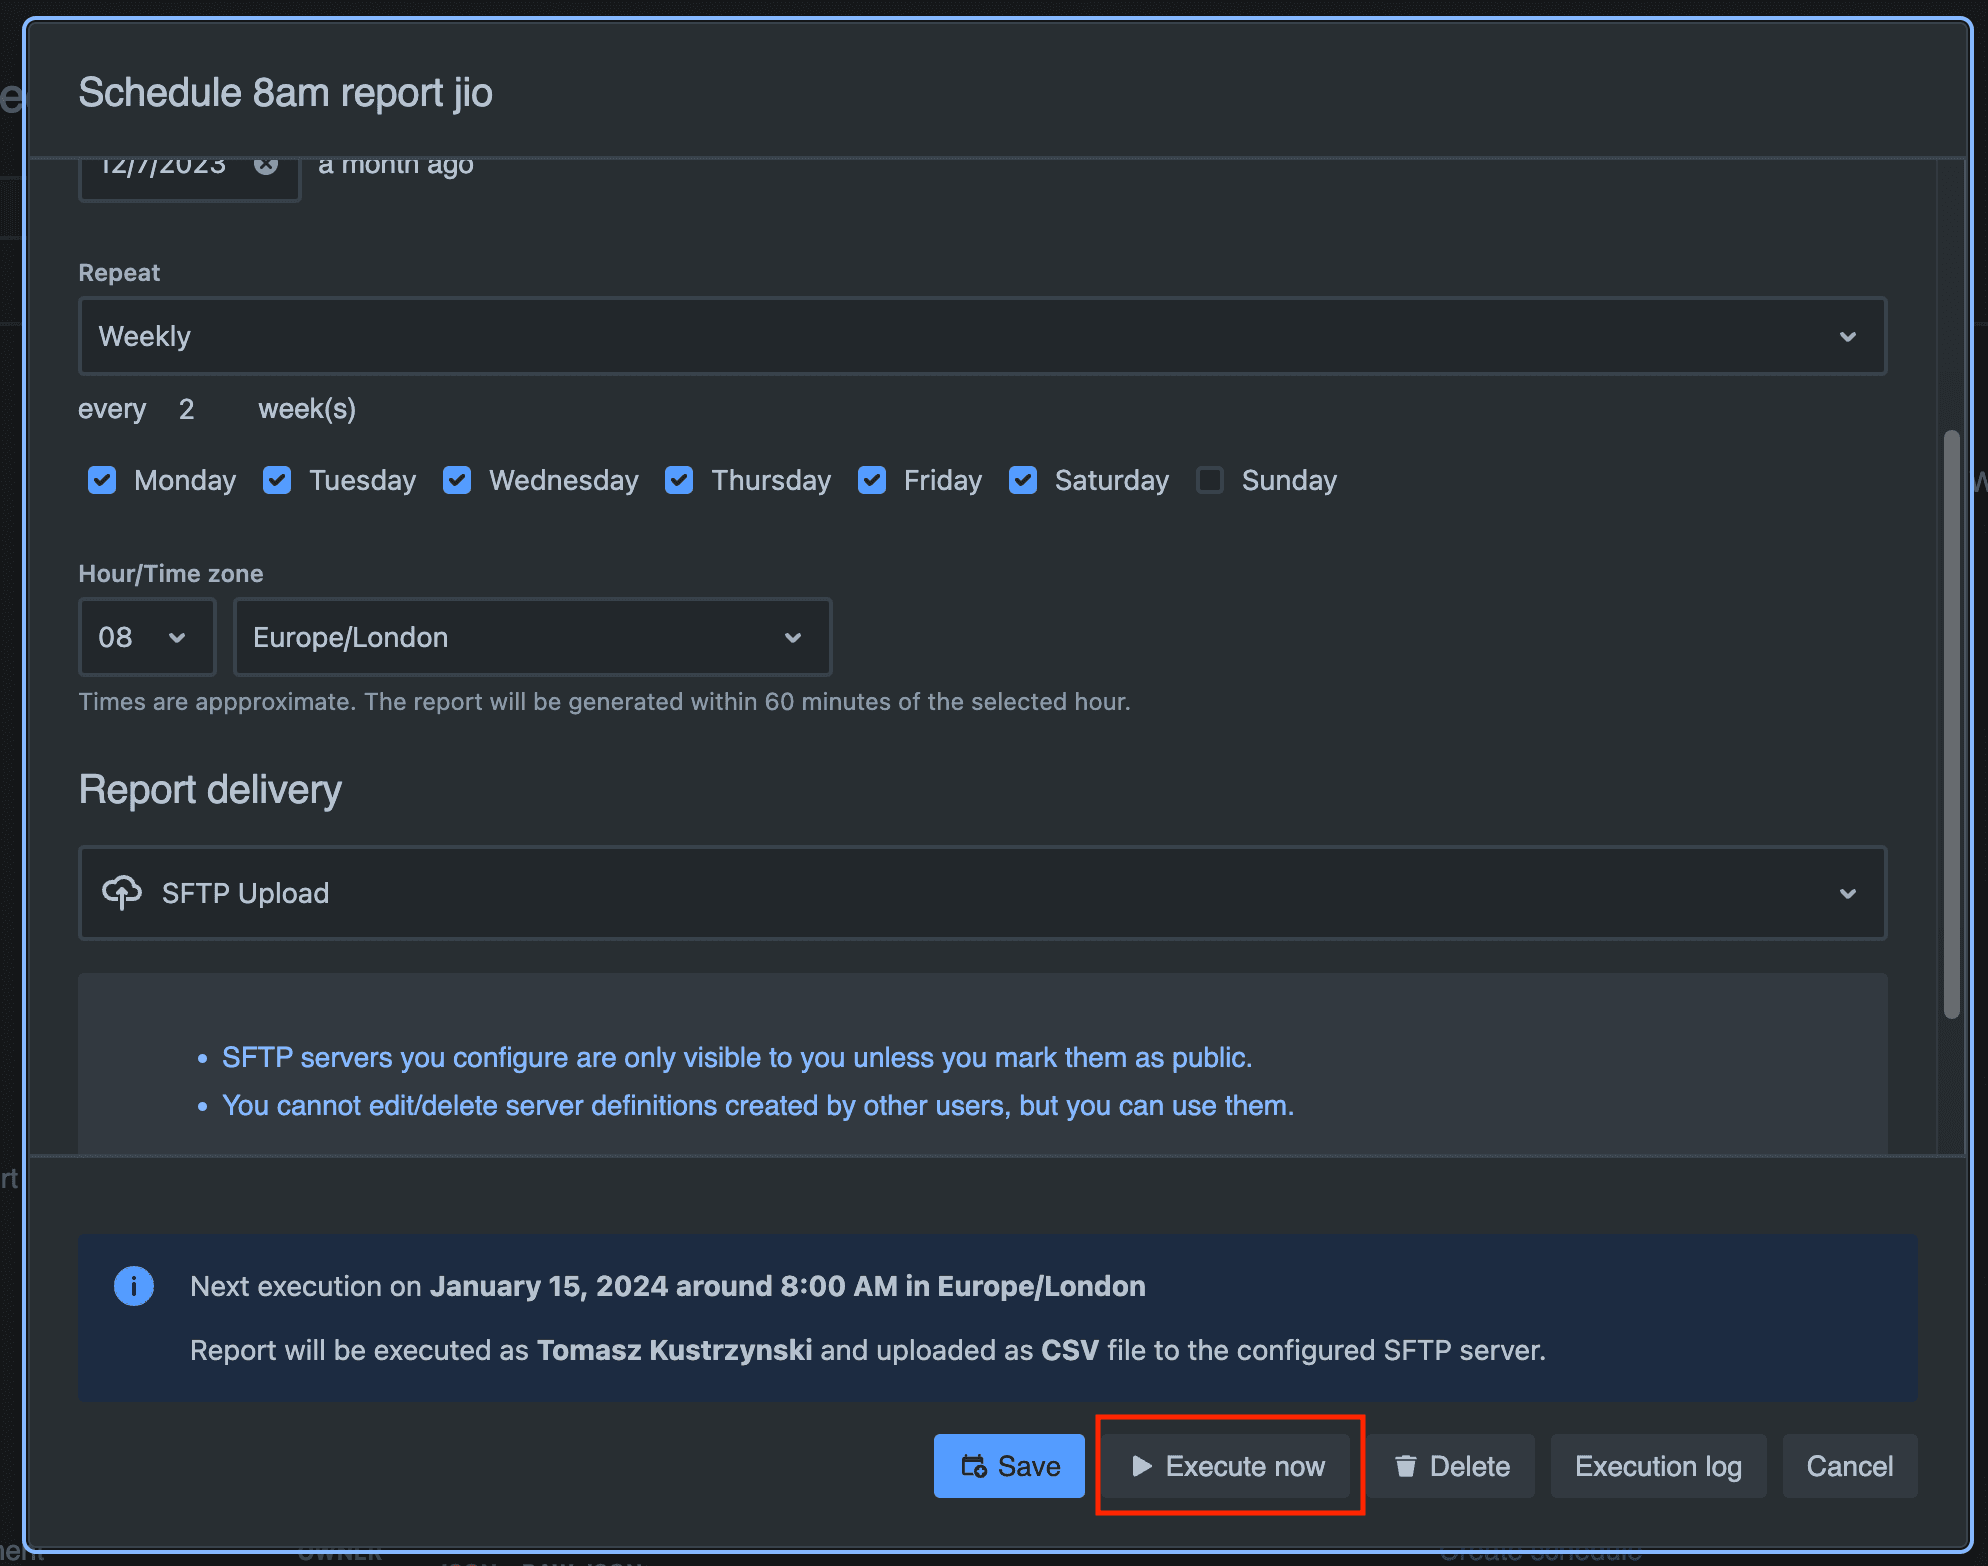 Execute now button in the schedule dialog